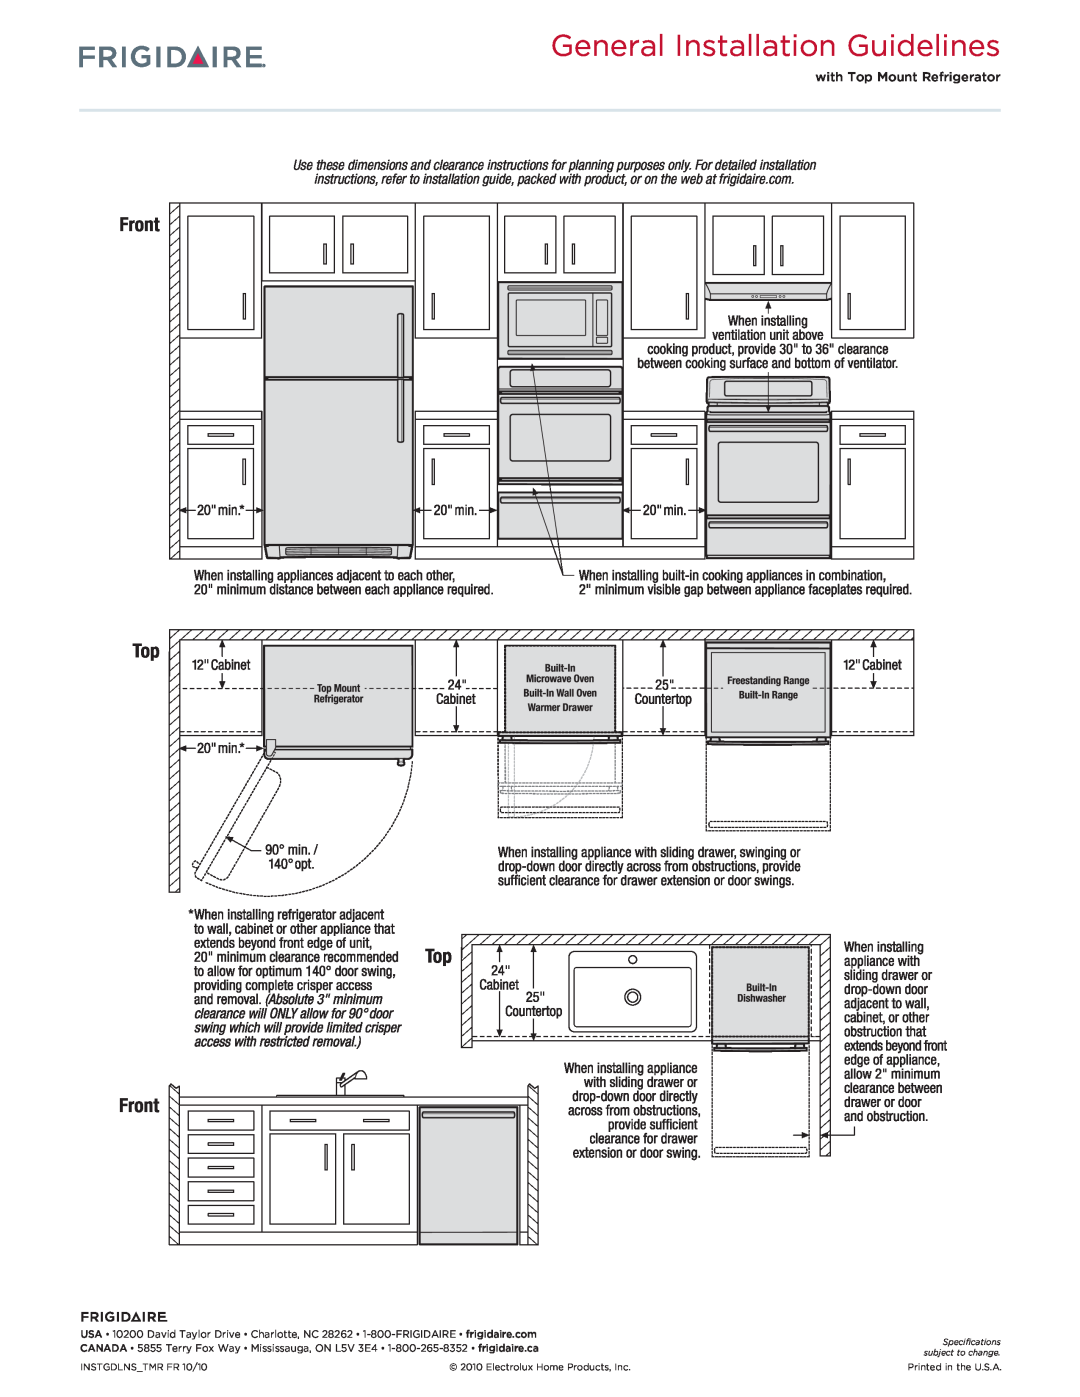 Frigidaire FGEW2745K F/W/B General Installation Guidelines, Top Front, with Top Mount Refrigerator, INSTGDLNS TMR FR 10/10 